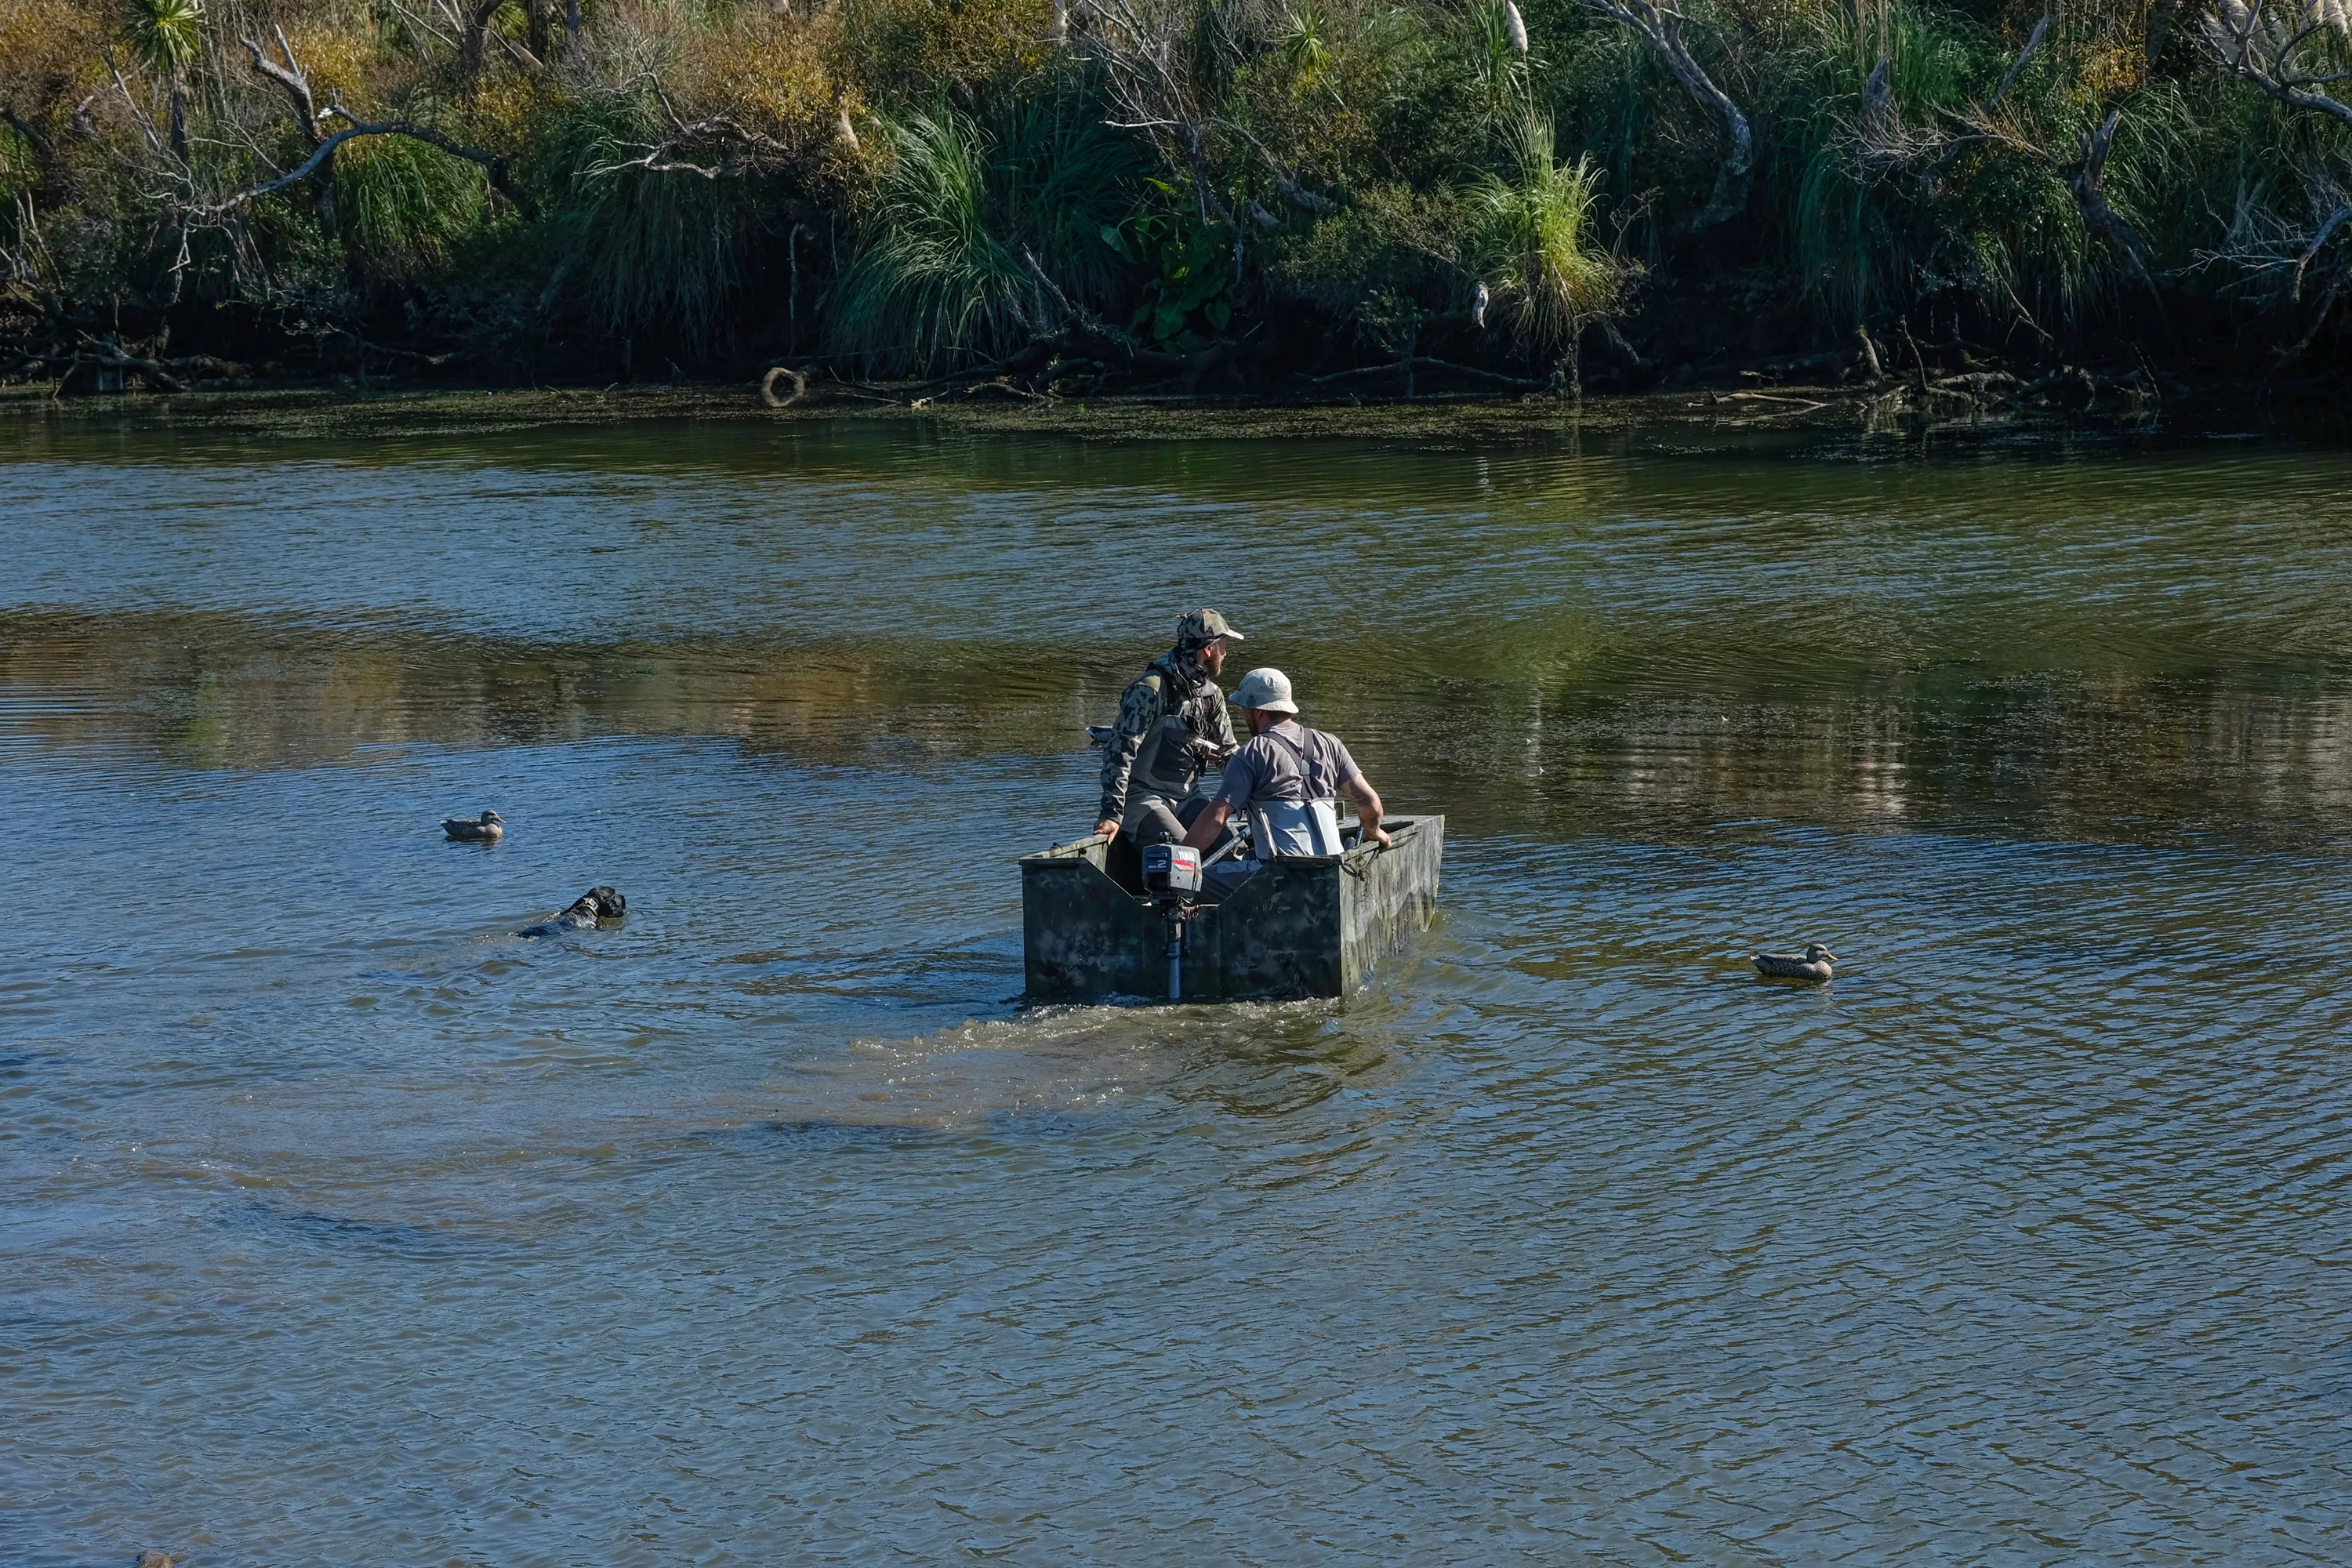 A punt for duck hunting season in new zealand